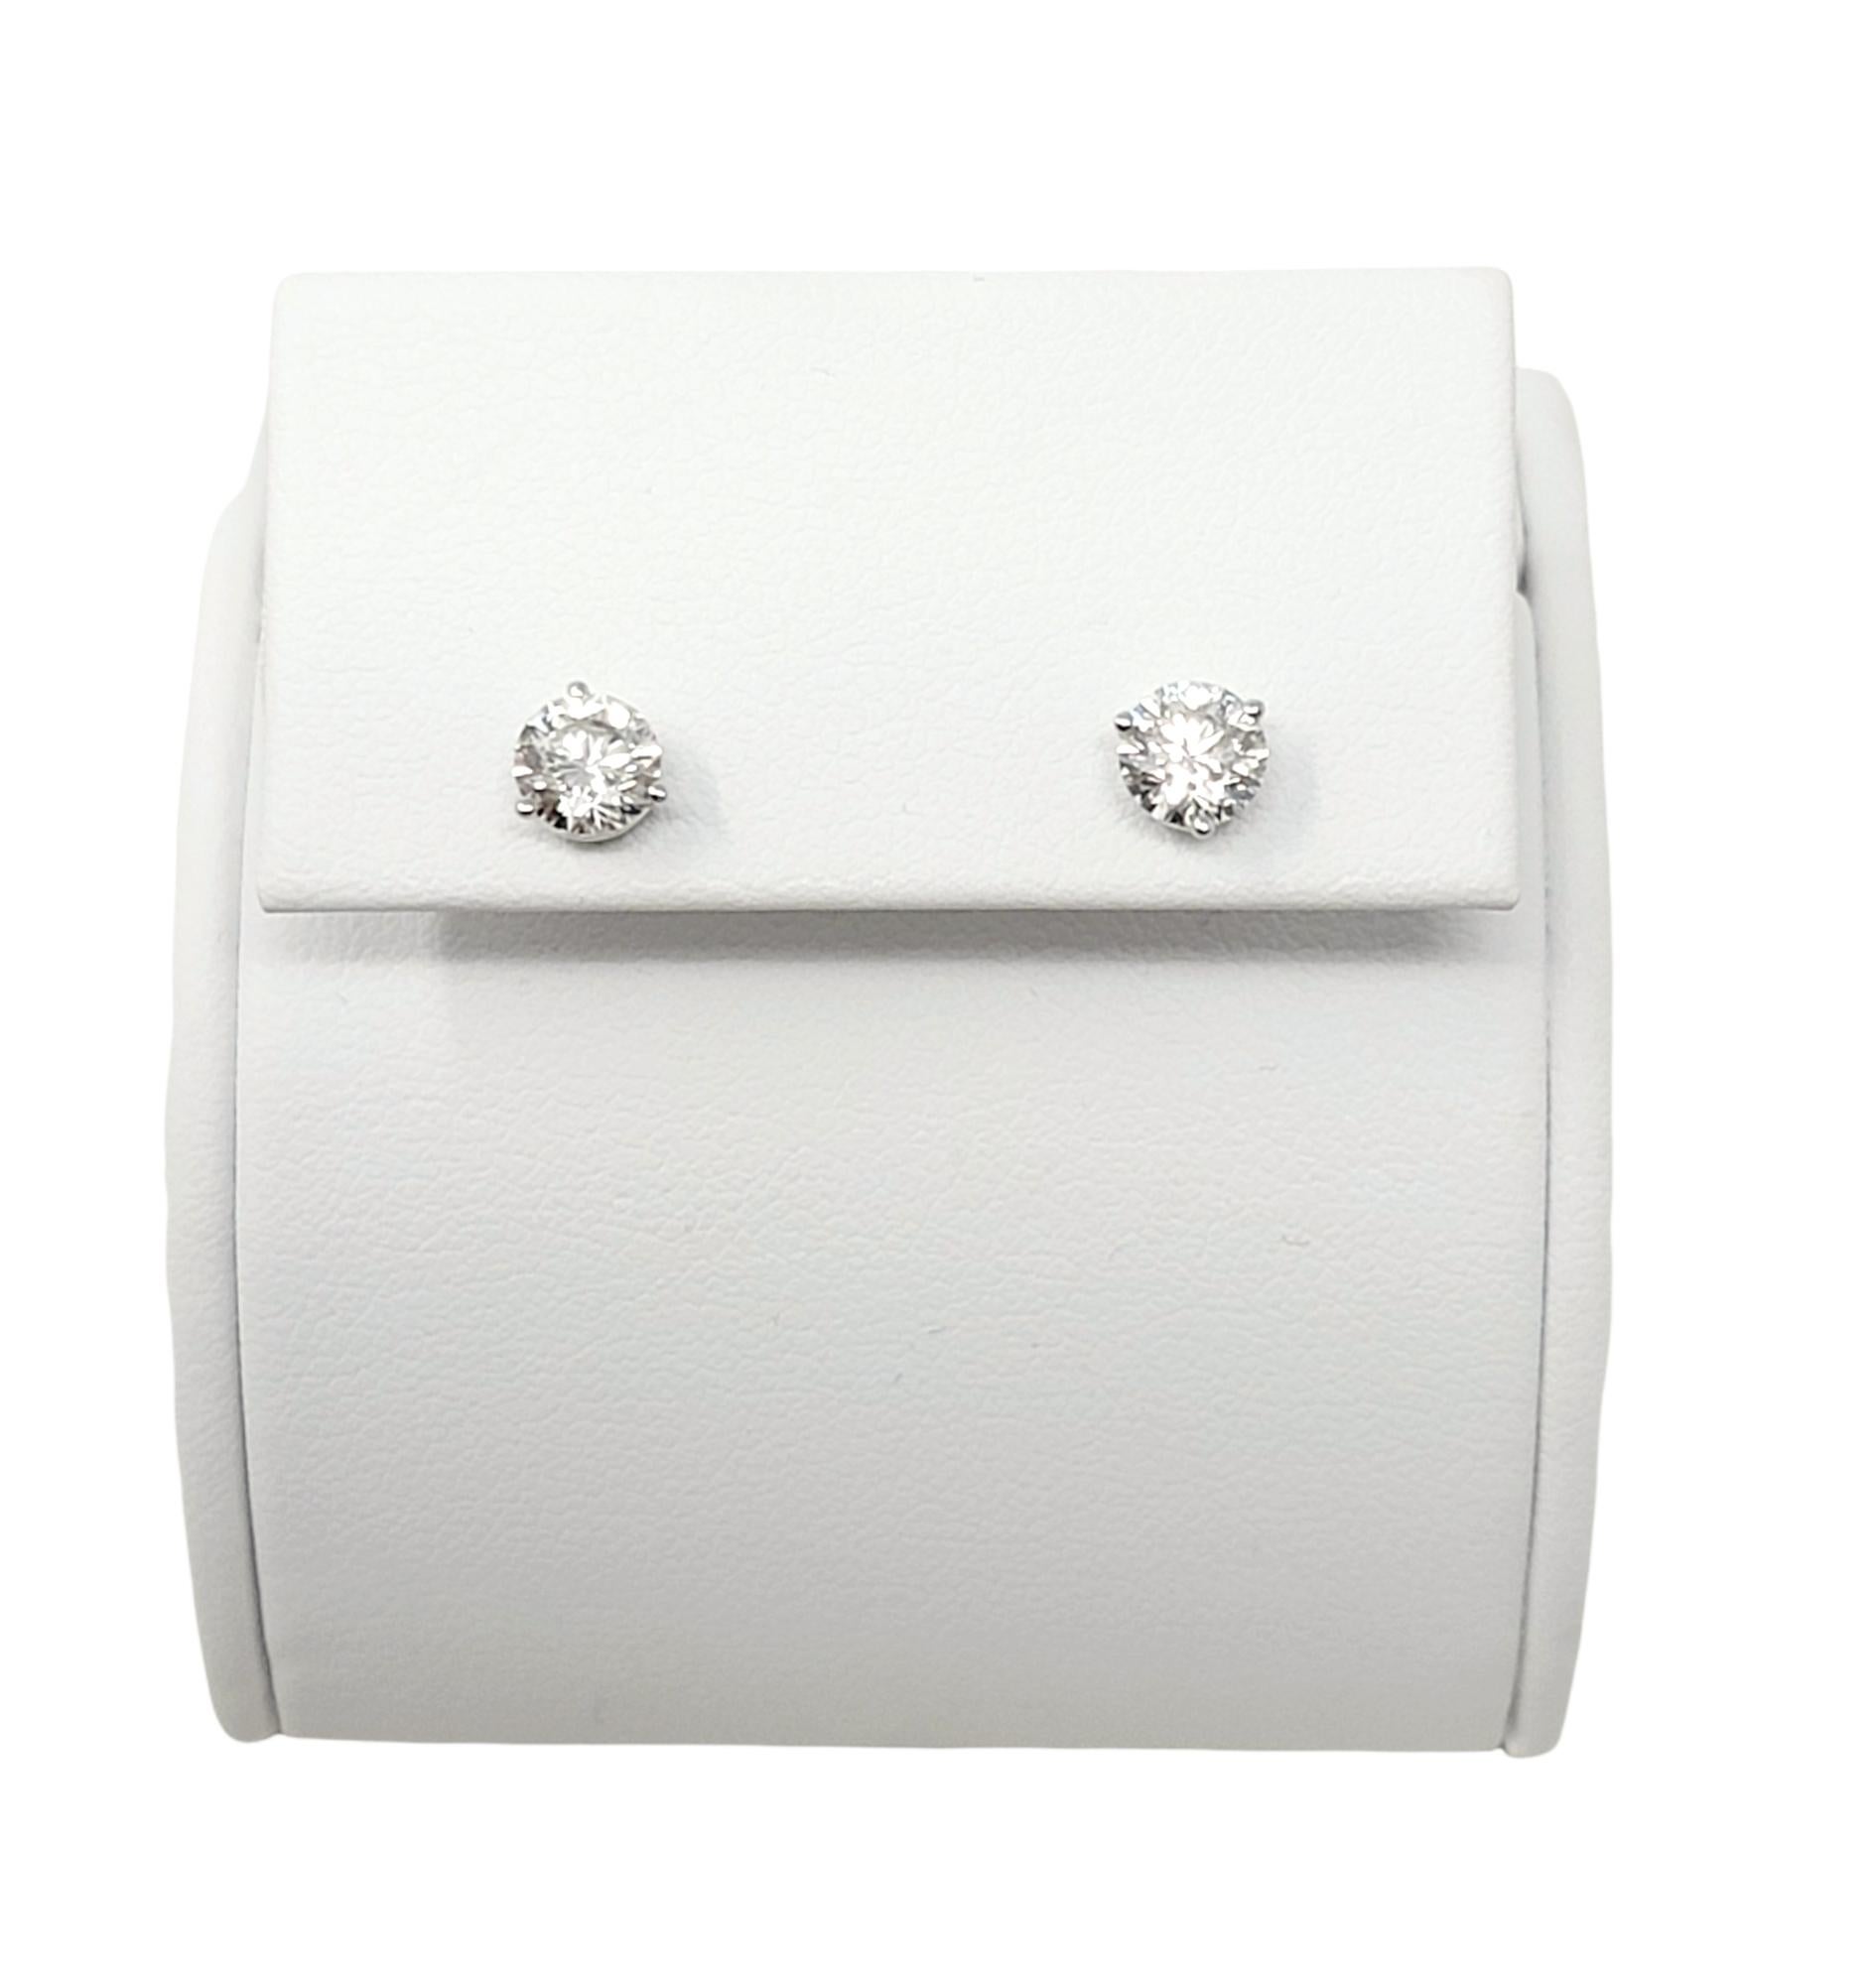 .94 Carats Total Round Leo Diamond Stud Earrings in White Gold 3 Prong Setting For Sale 7